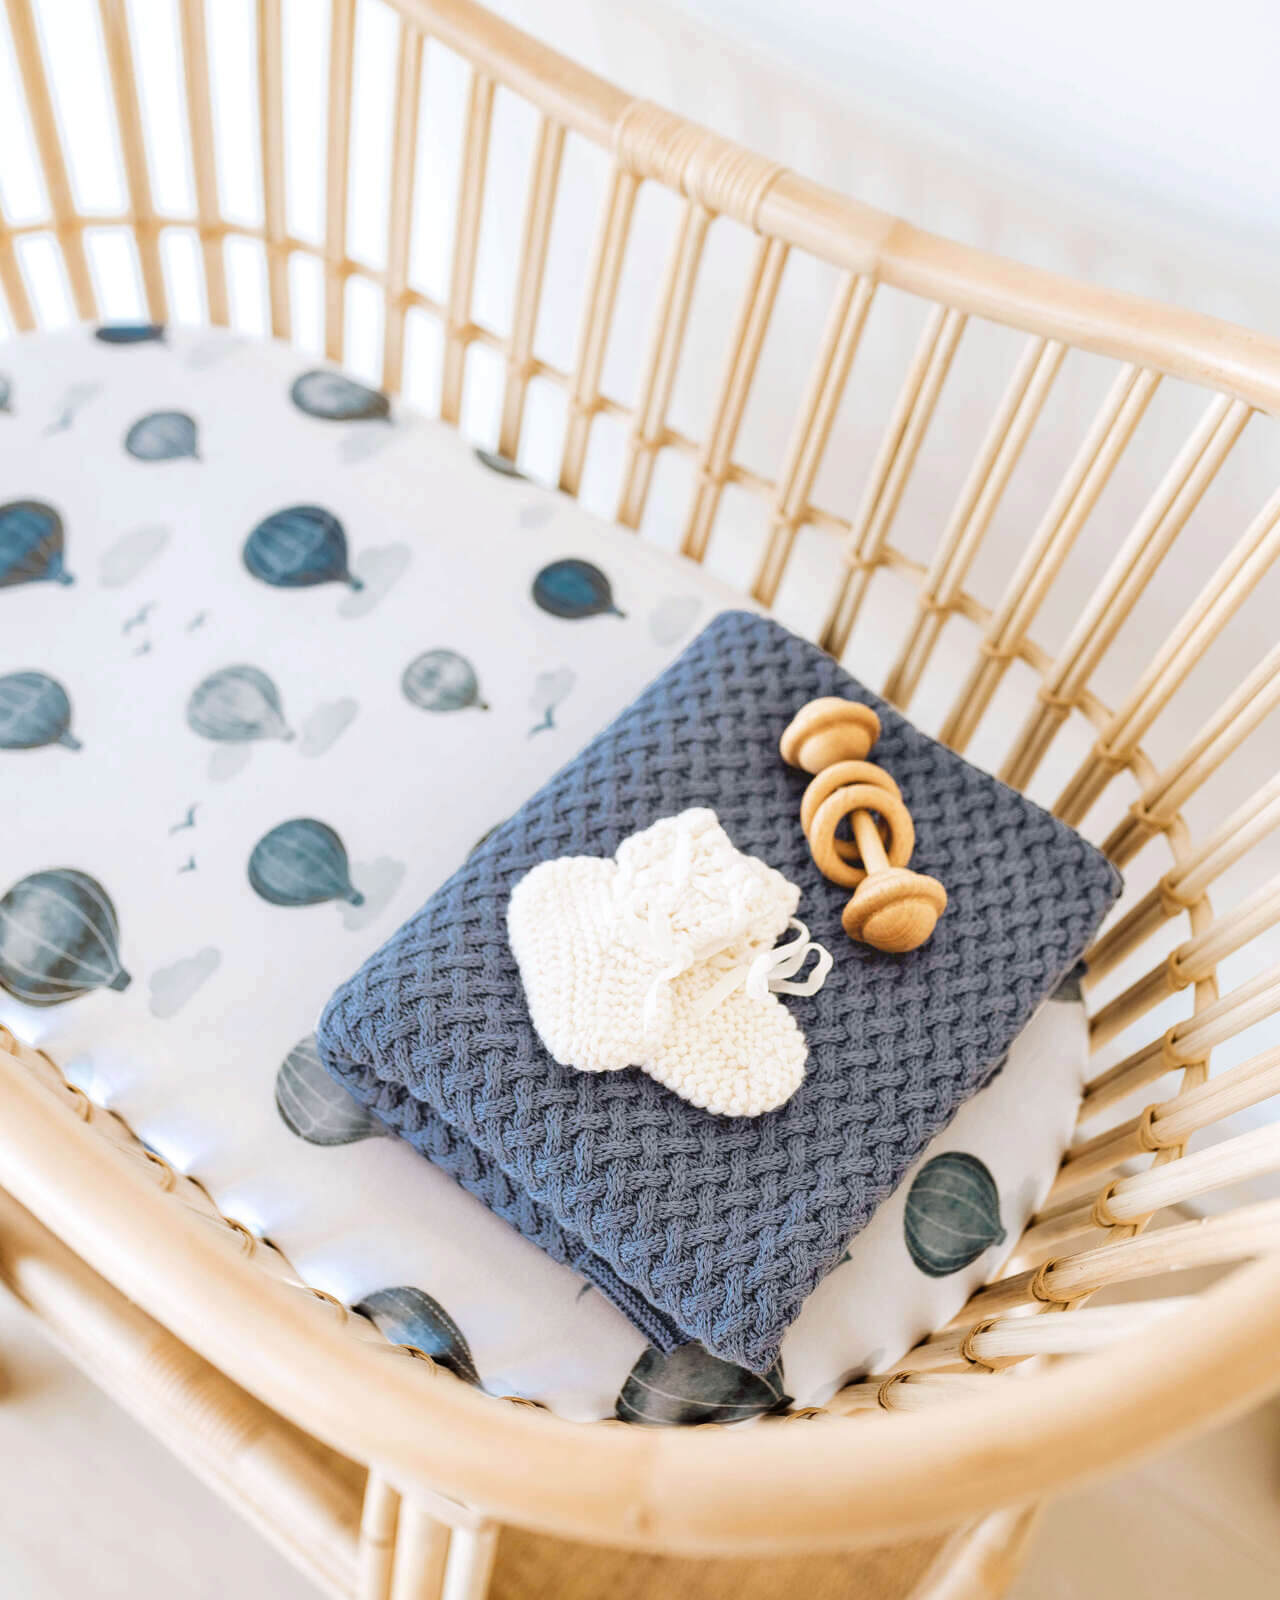 River diamond knitted baby blanket from Snuggle Hunny Kids is now available on Sugarbird Kids.